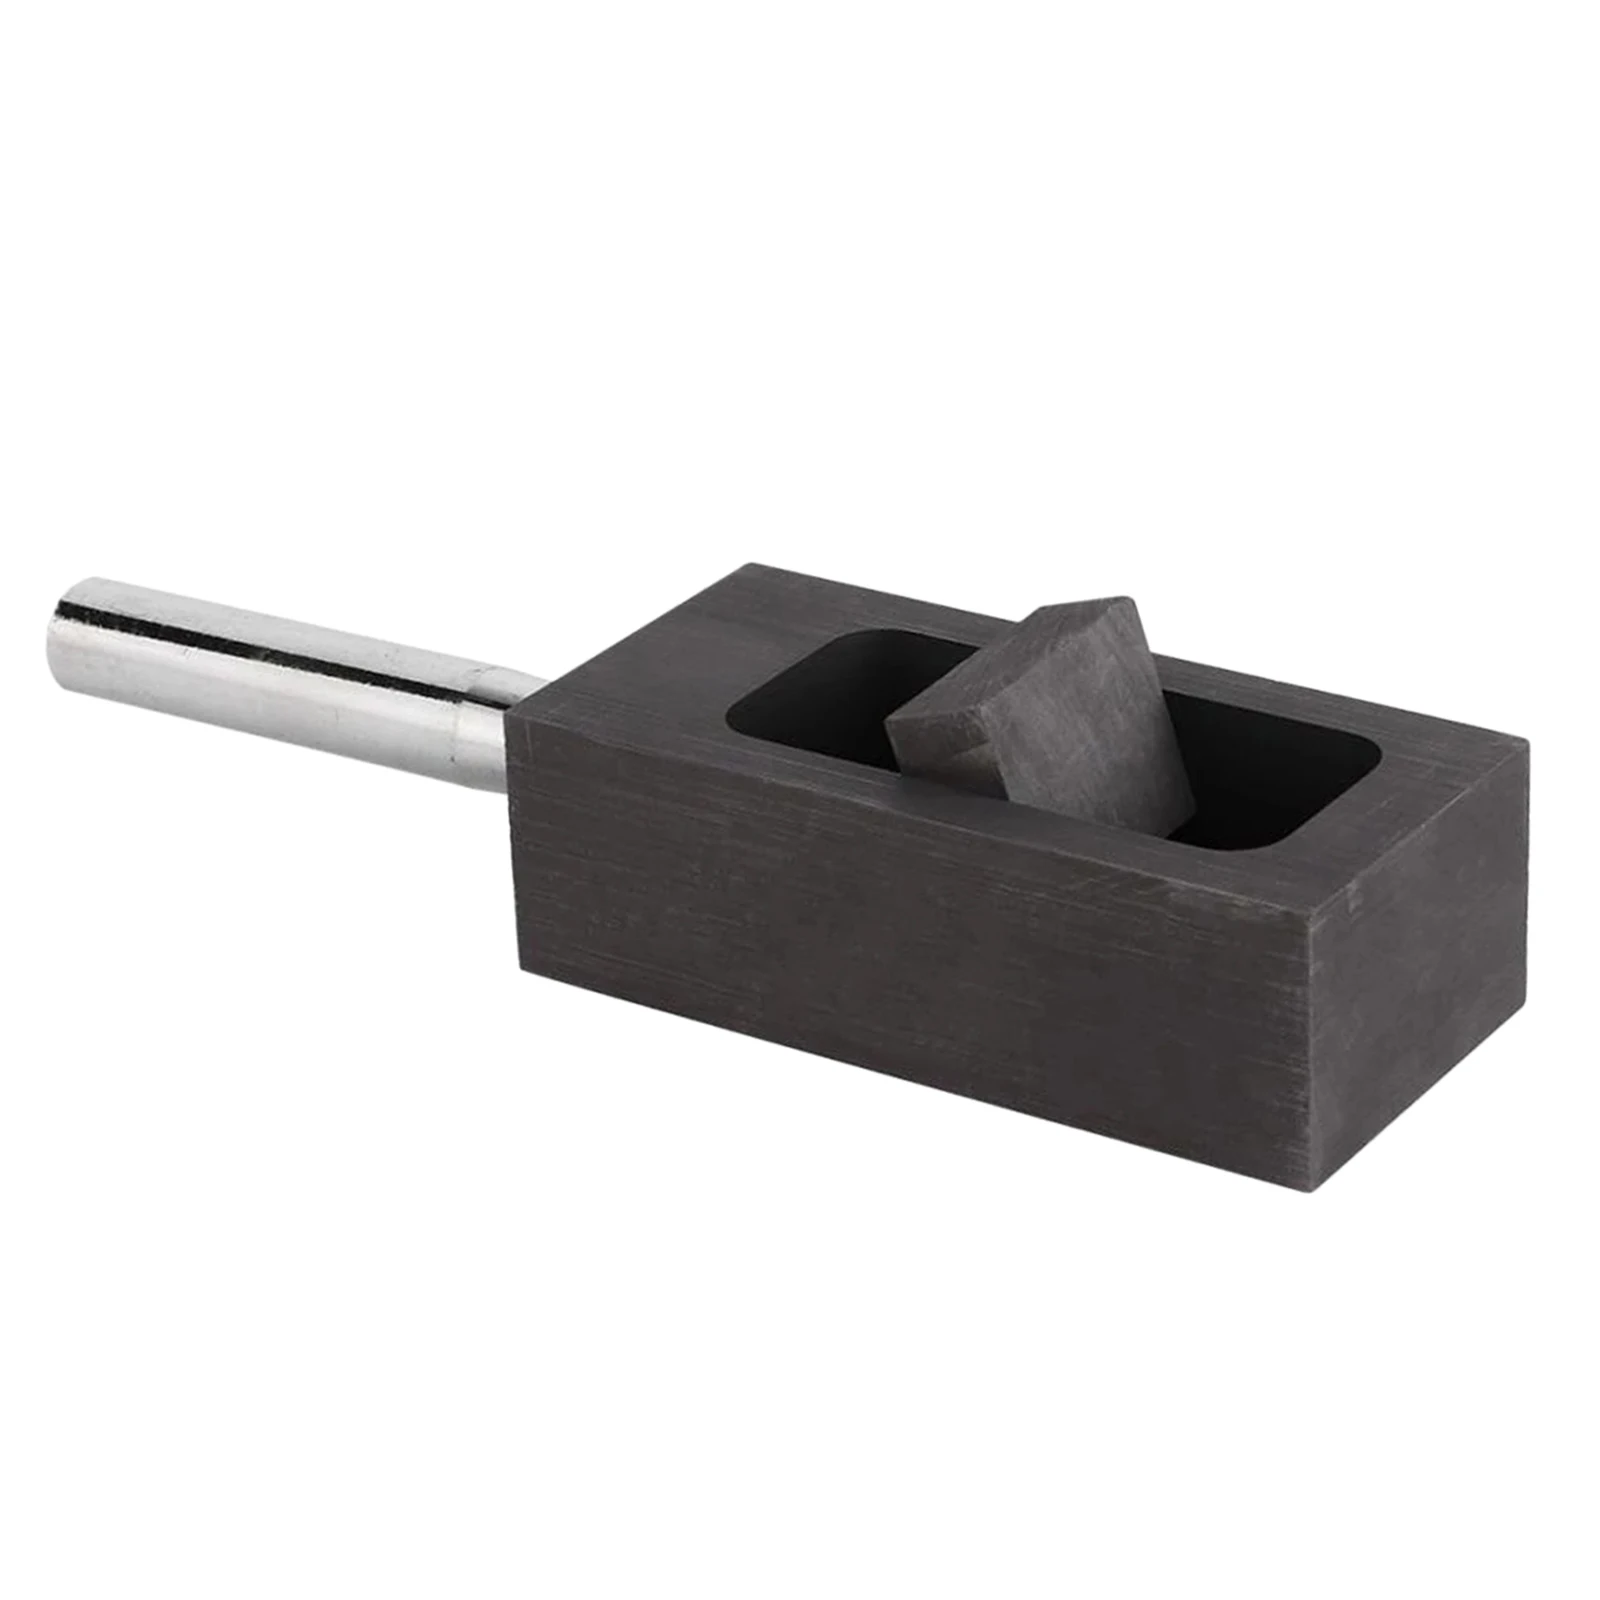 5 Kg Graphite Ingot Mold Graphite Crucible for Melting Gold Silver Casting Refining DIY Jewelry Finding